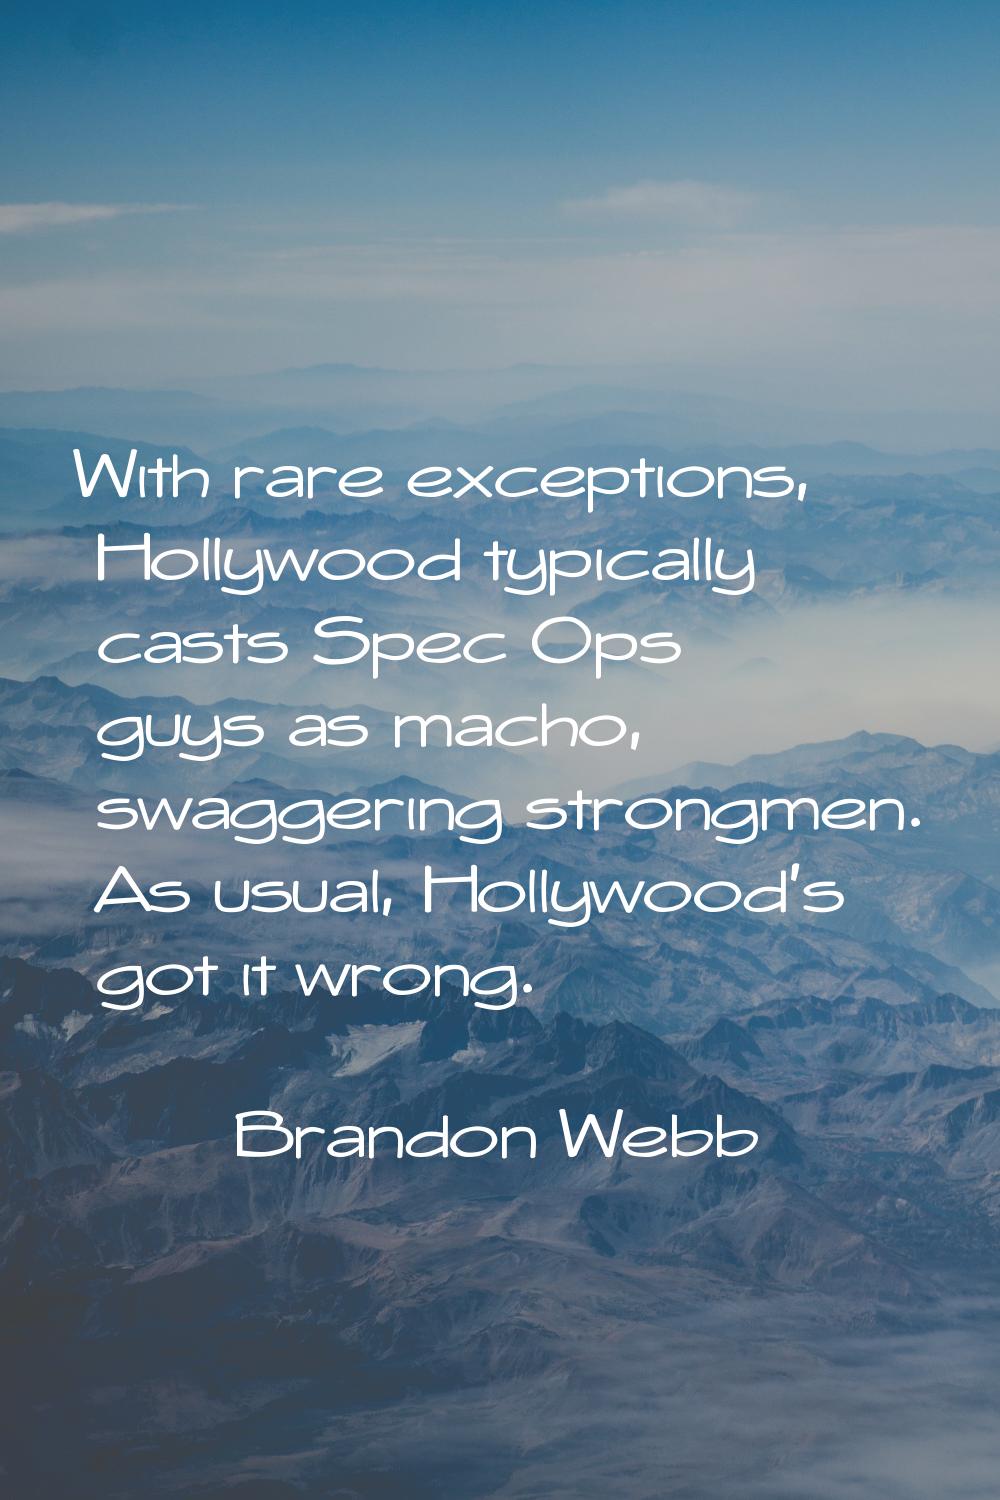 With rare exceptions, Hollywood typically casts Spec Ops guys as macho, swaggering strongmen. As us